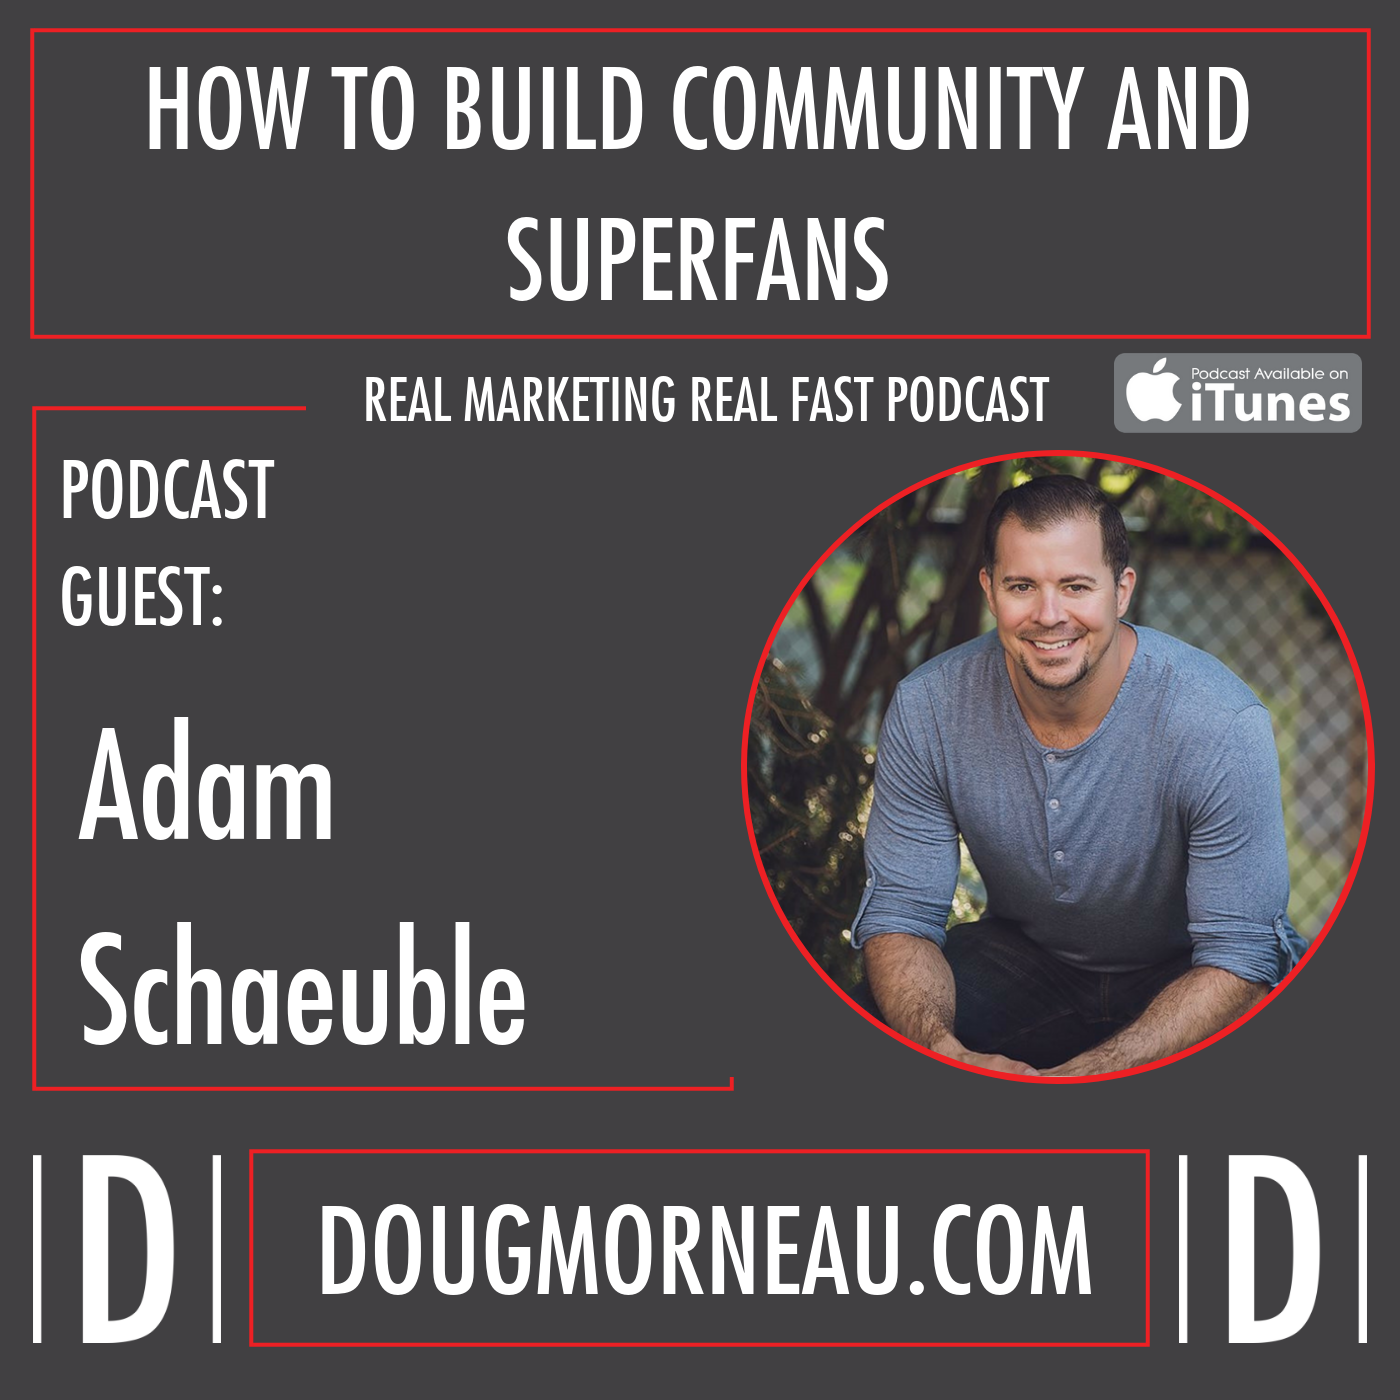 HOW TO BUILD COMMUNITY AND SUPERFANS Adam Schaeuble DOUG MORNEAU - REAL MARKETING REAL FAST PODCAST